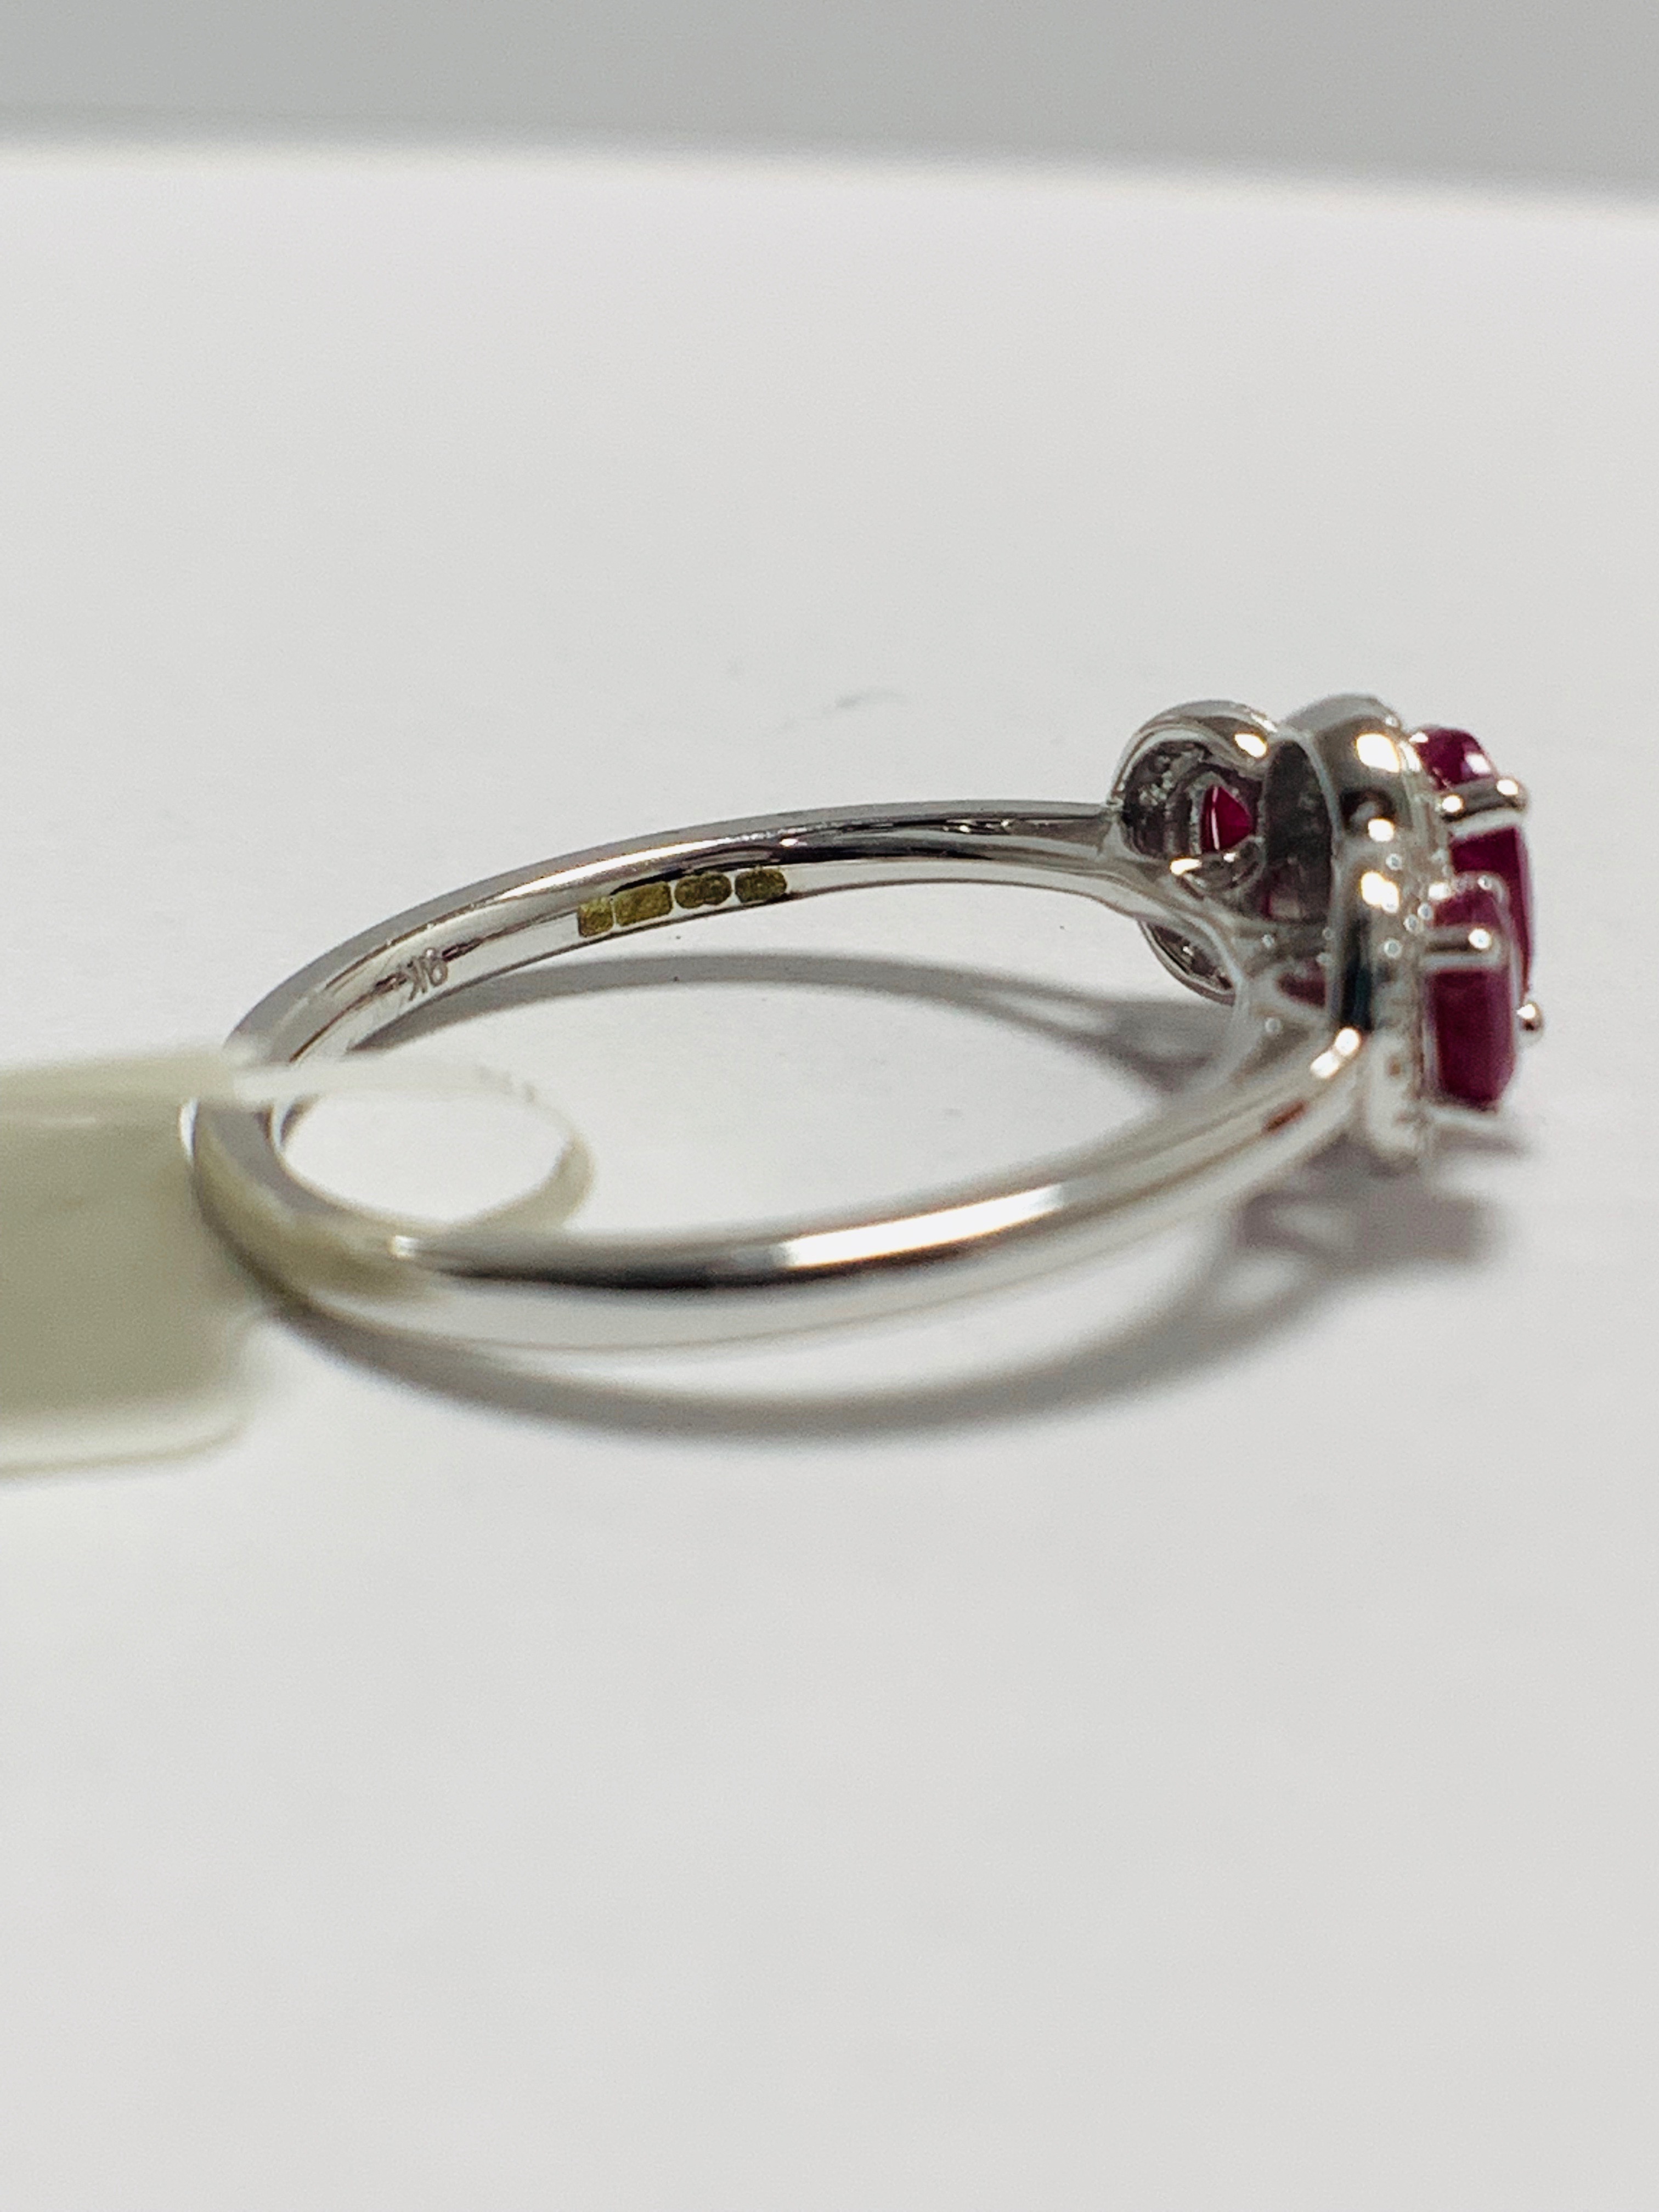 9ct white Gold Ruby trilogy style ring - Image 6 of 8